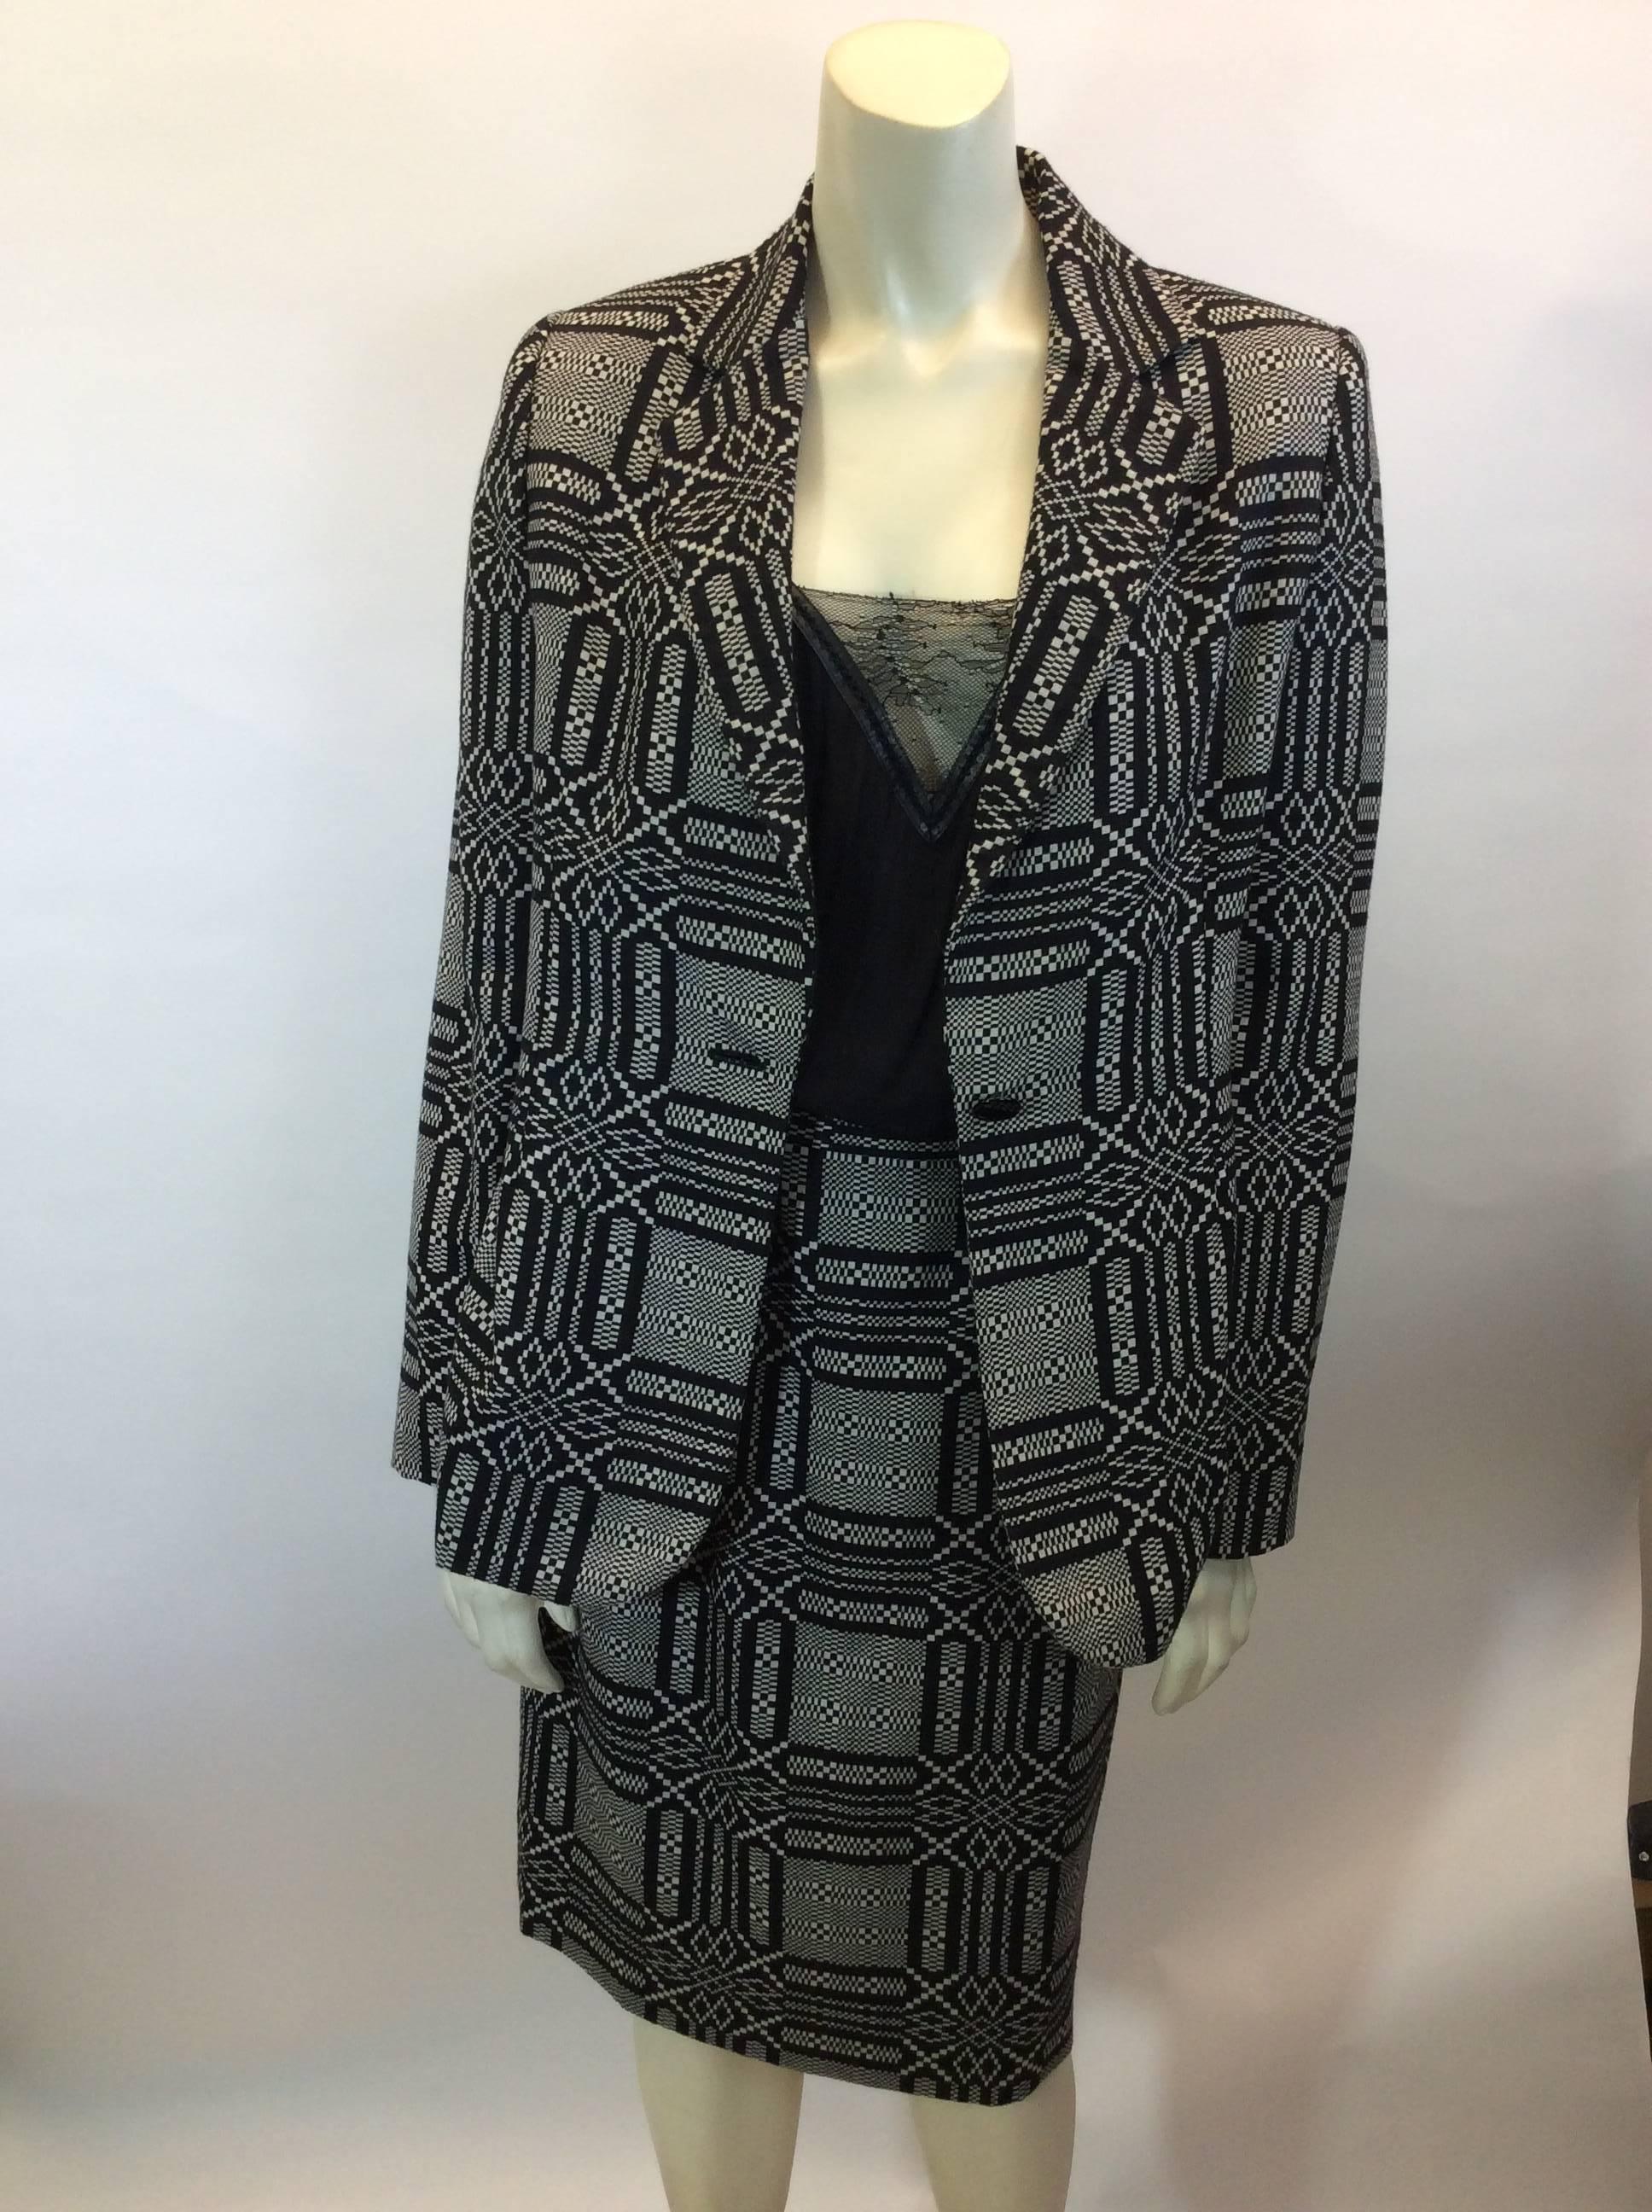 Bill Blass Printed Skirt Suit
Skirt size 6, Jacket size 6
Made in the USA
Side zipper closure on skirt
One button closure on jacket
Two hip pockets on jacket
$299
Fully lined interior